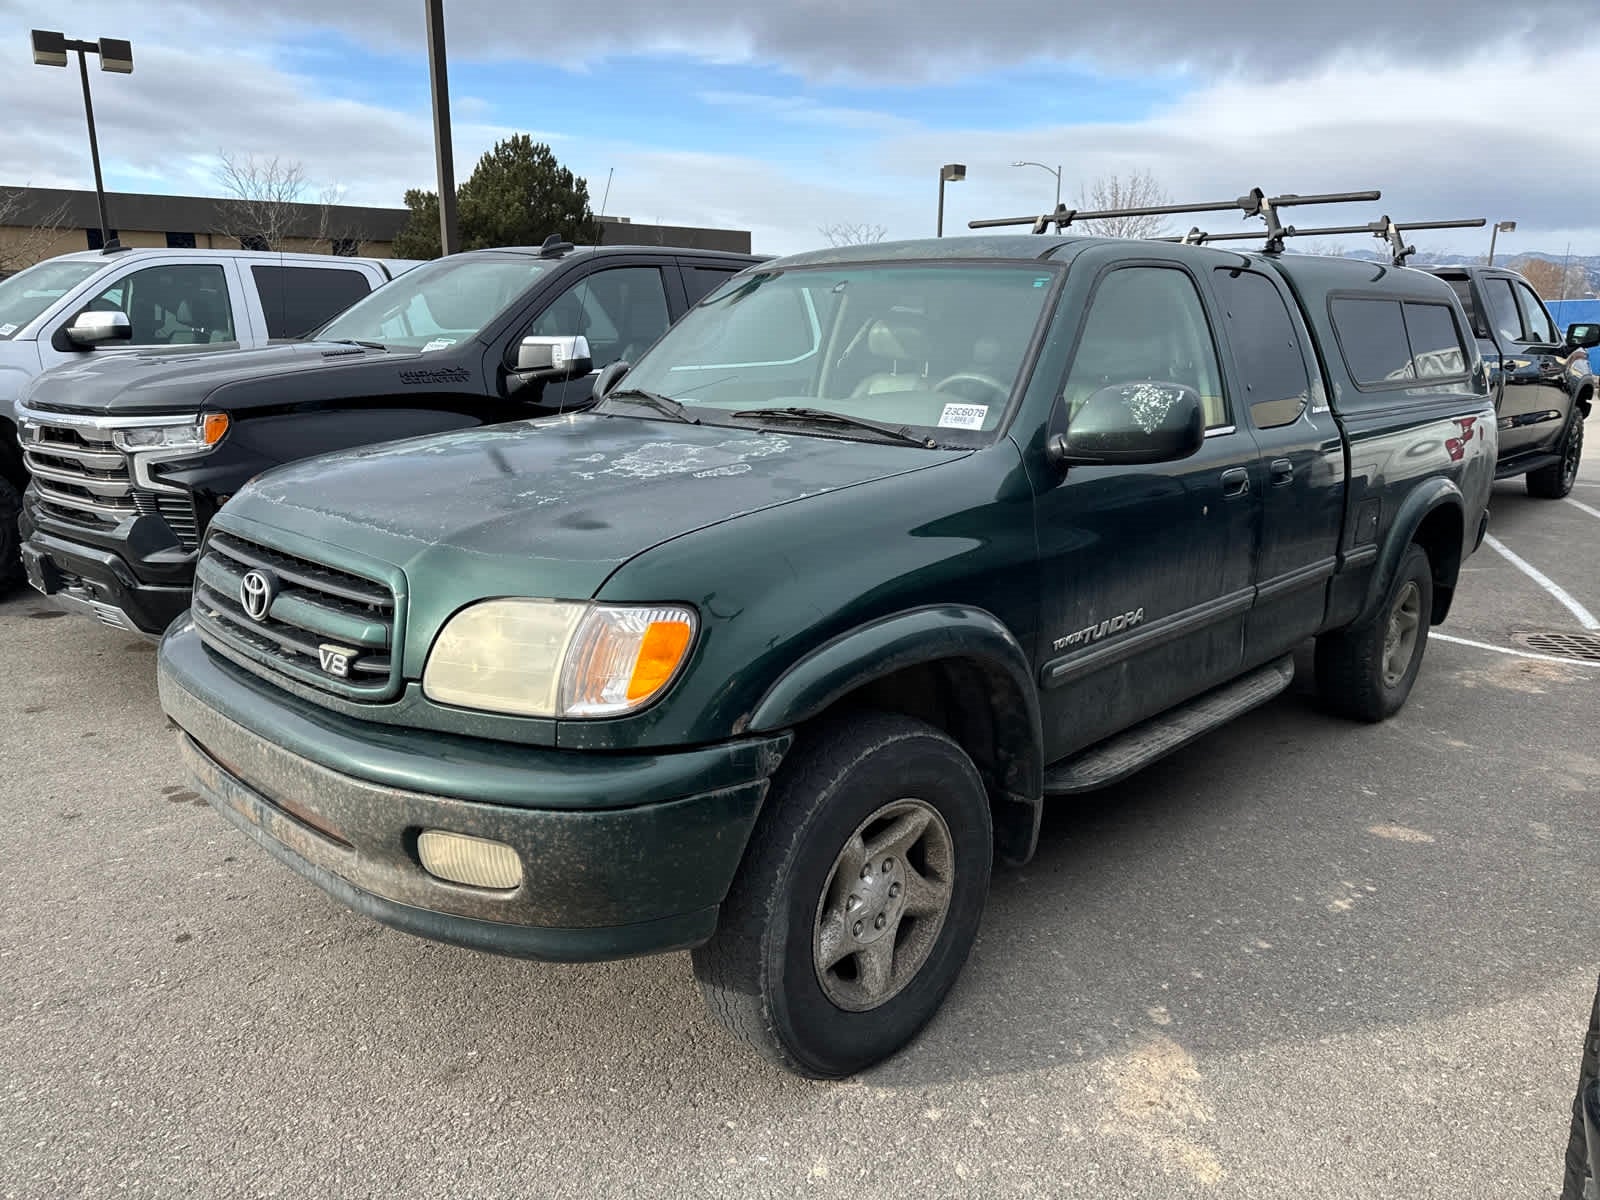 Used 2001 Toyota Tundra Limited with VIN 5TBBT48191S130628 for sale in Missoula, MT